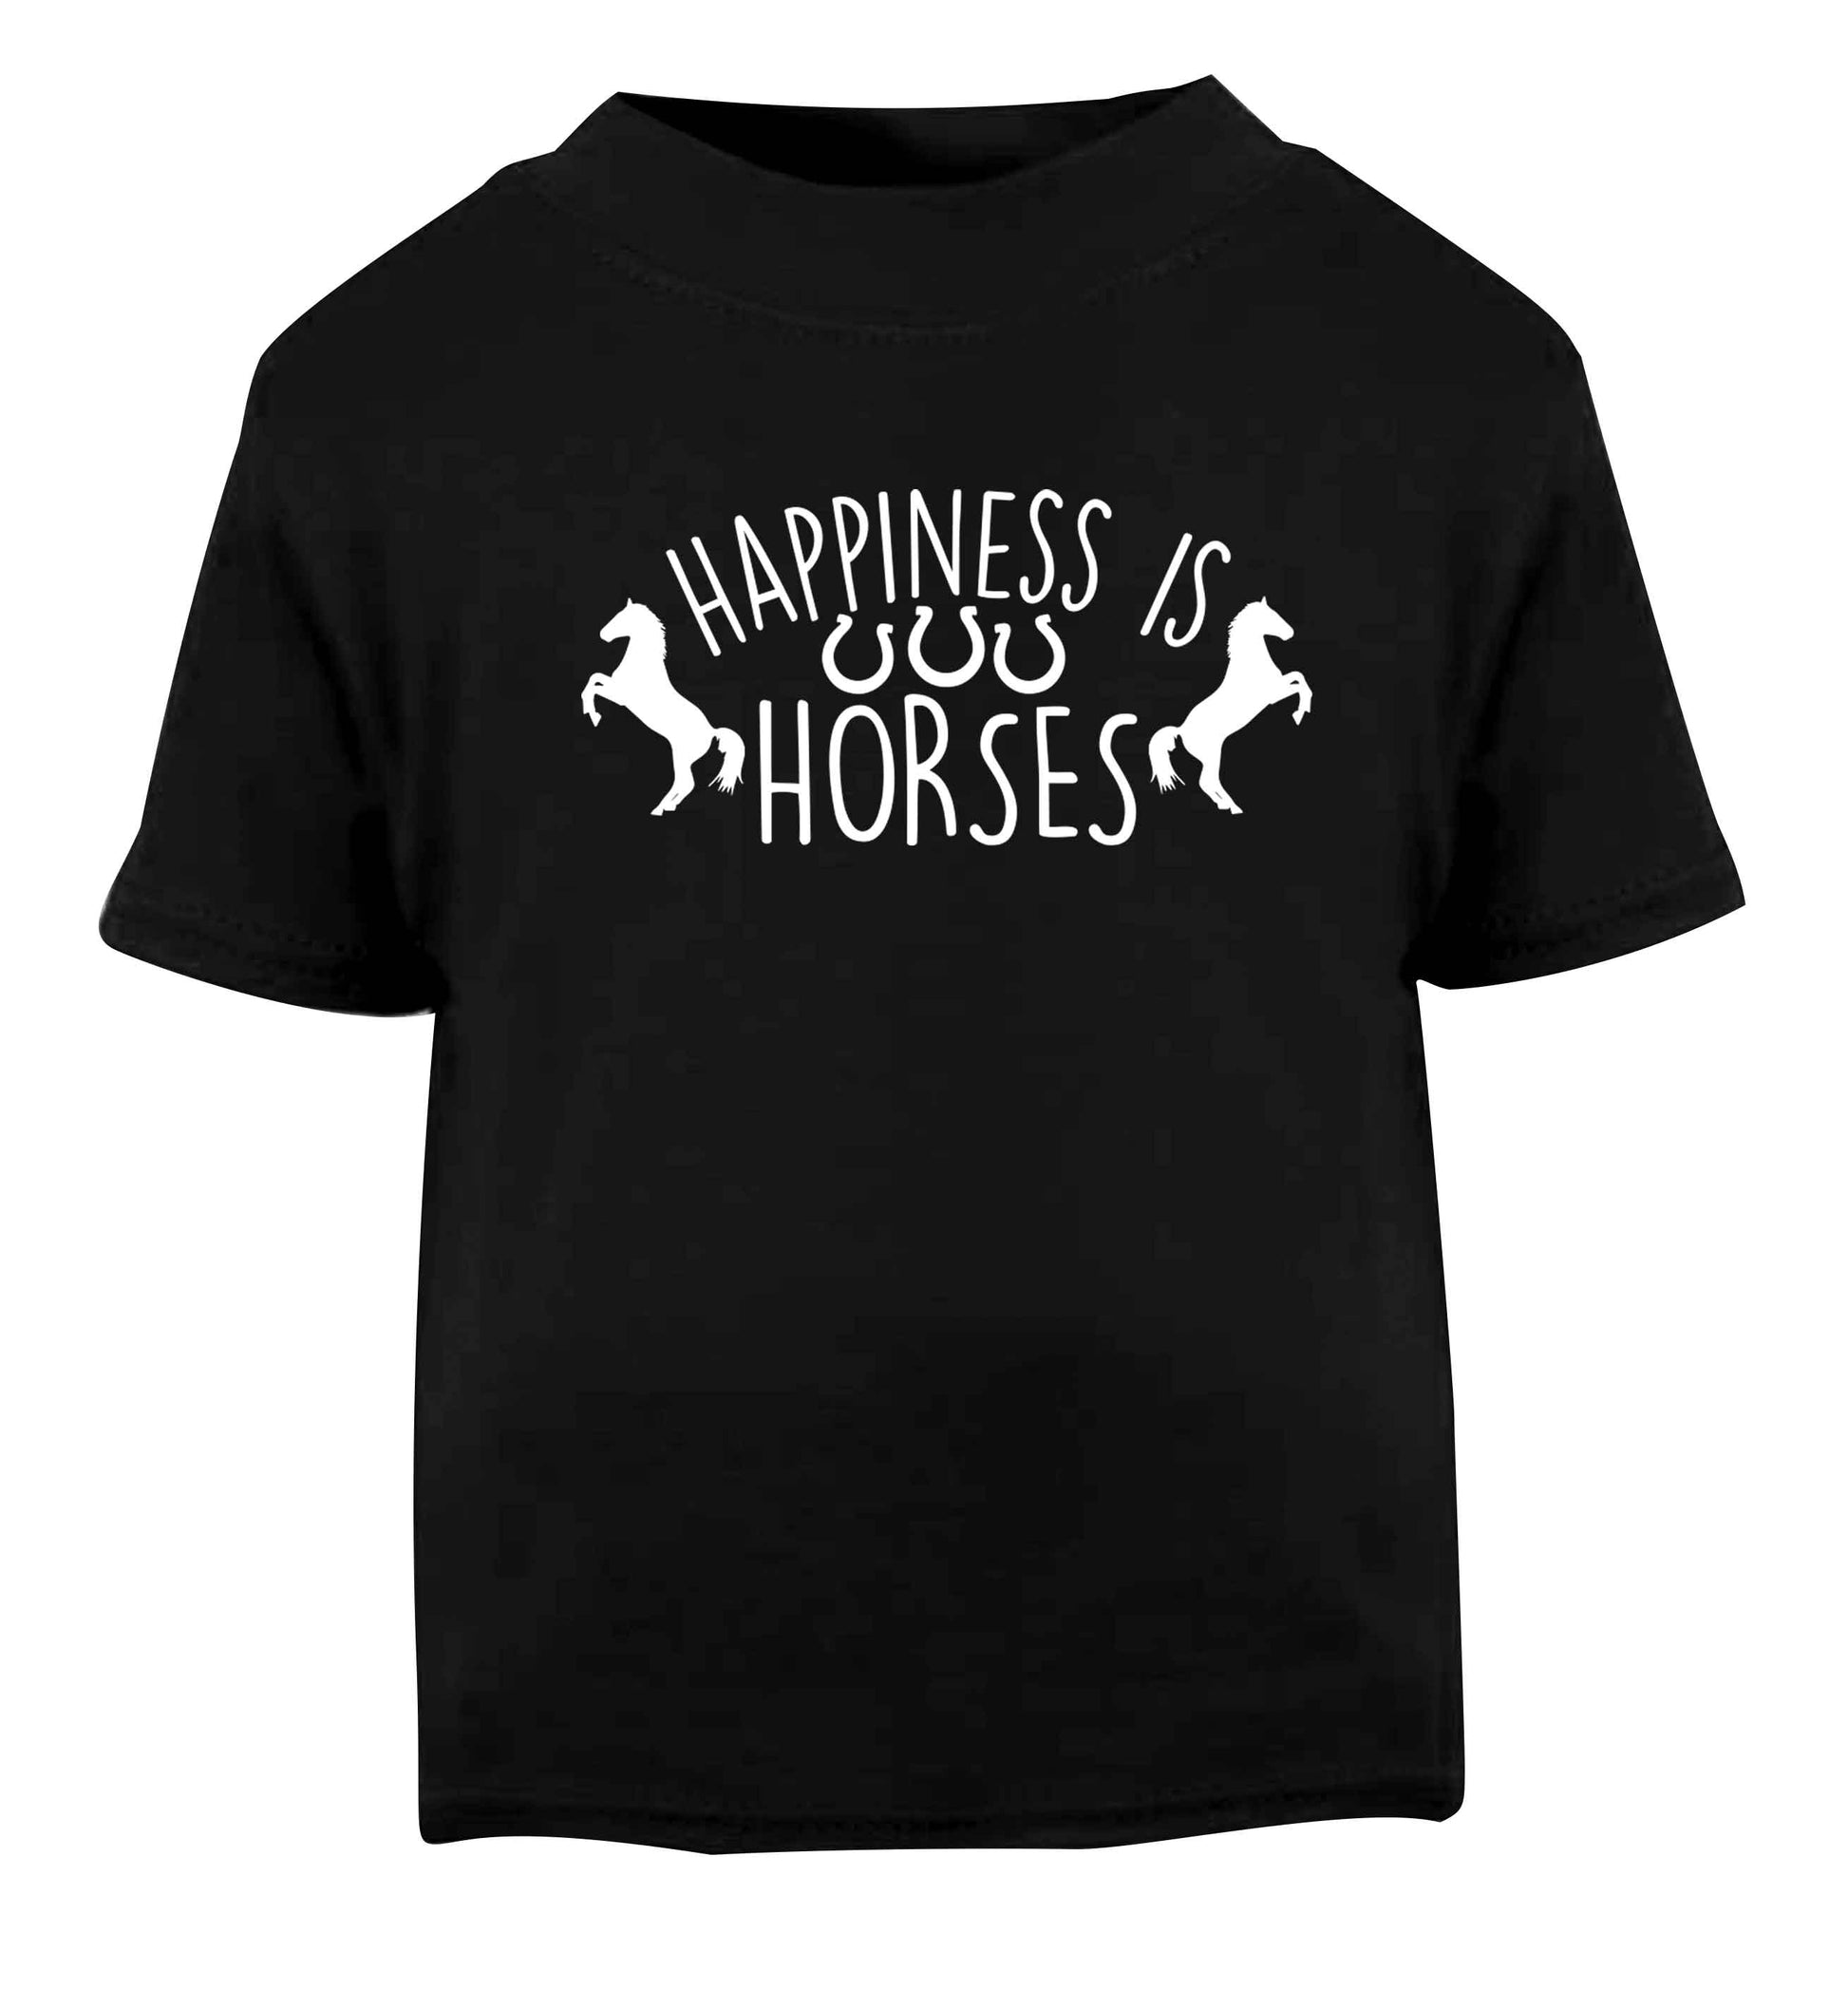 Happiness is horses Black baby toddler Tshirt 2 years